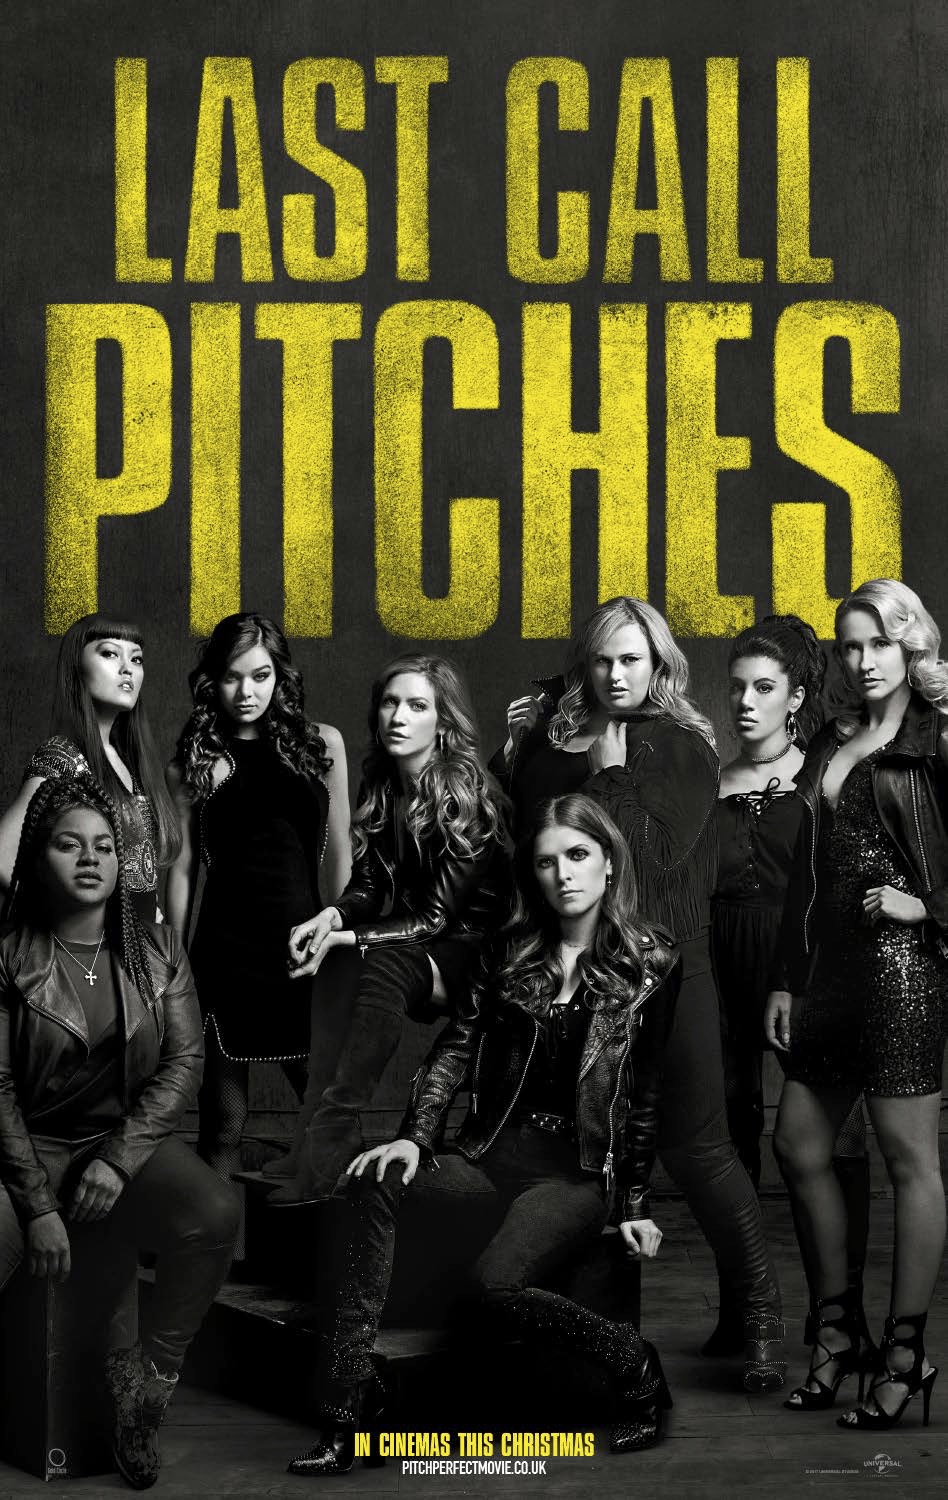 pitch perfect 3 first look image